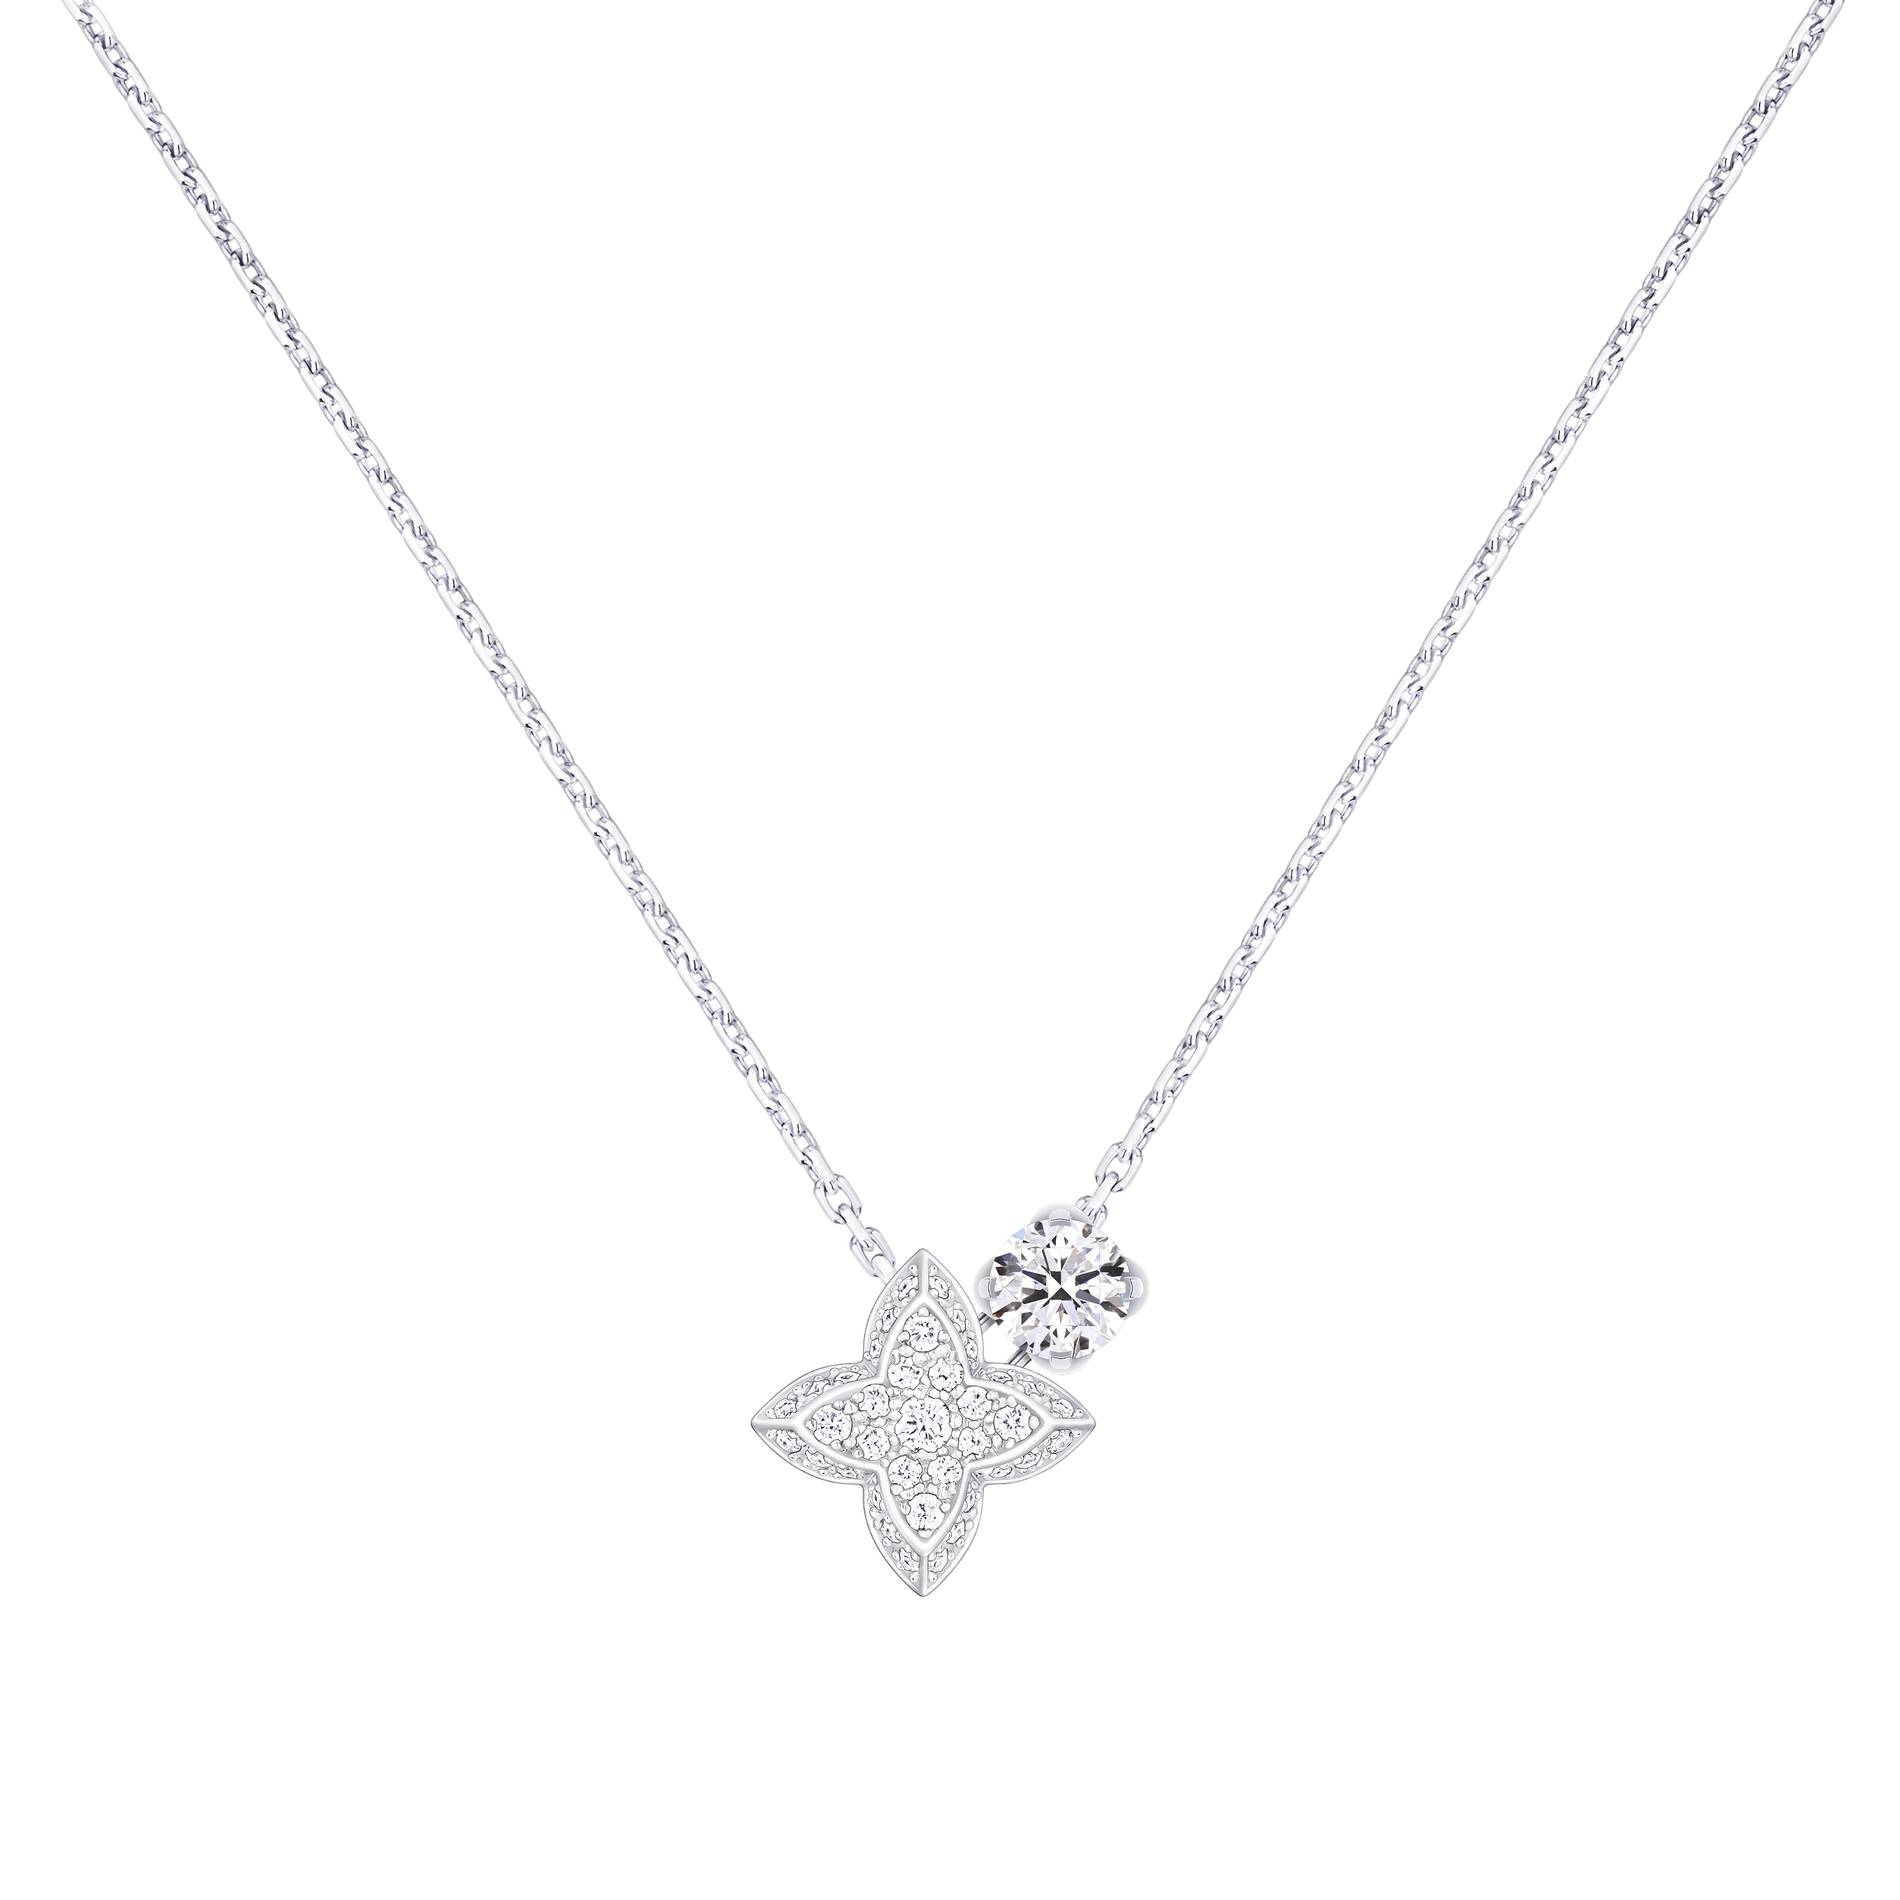 gift-guide-jewelry-lv-pendant-necklace.jpg